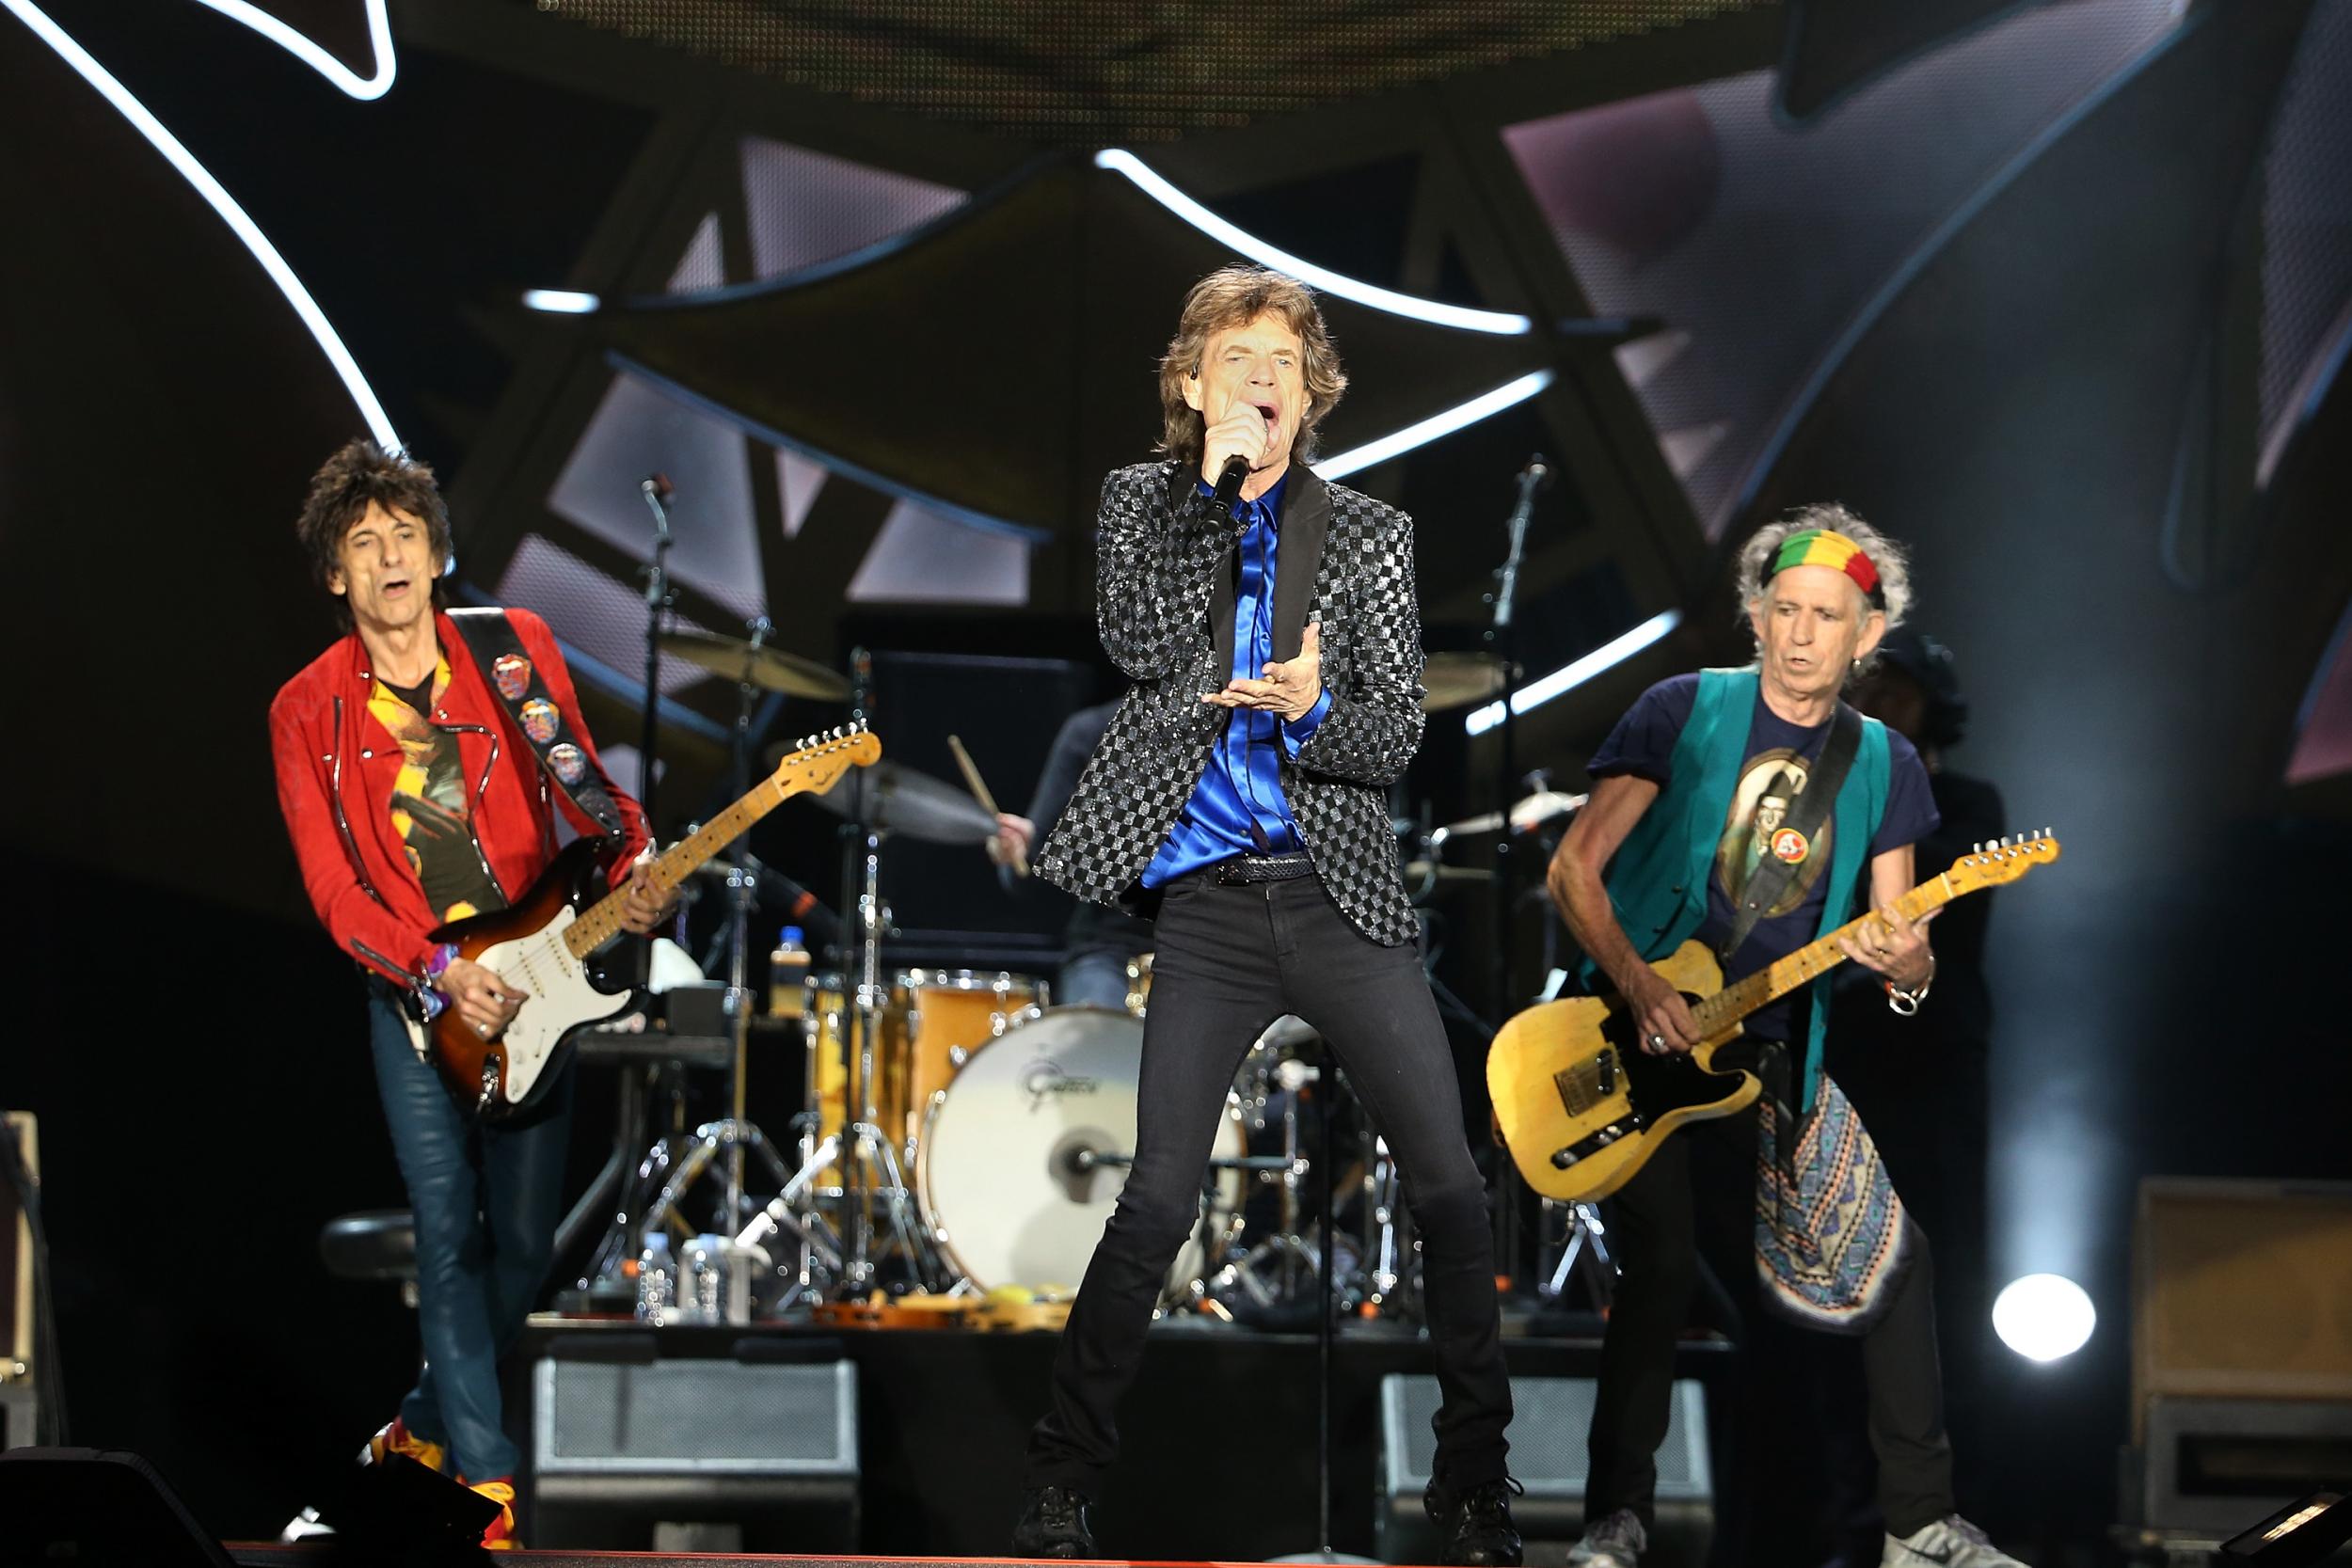 Mick Jagger proves he's still got moves with The Rolling Stones (Getty Images)